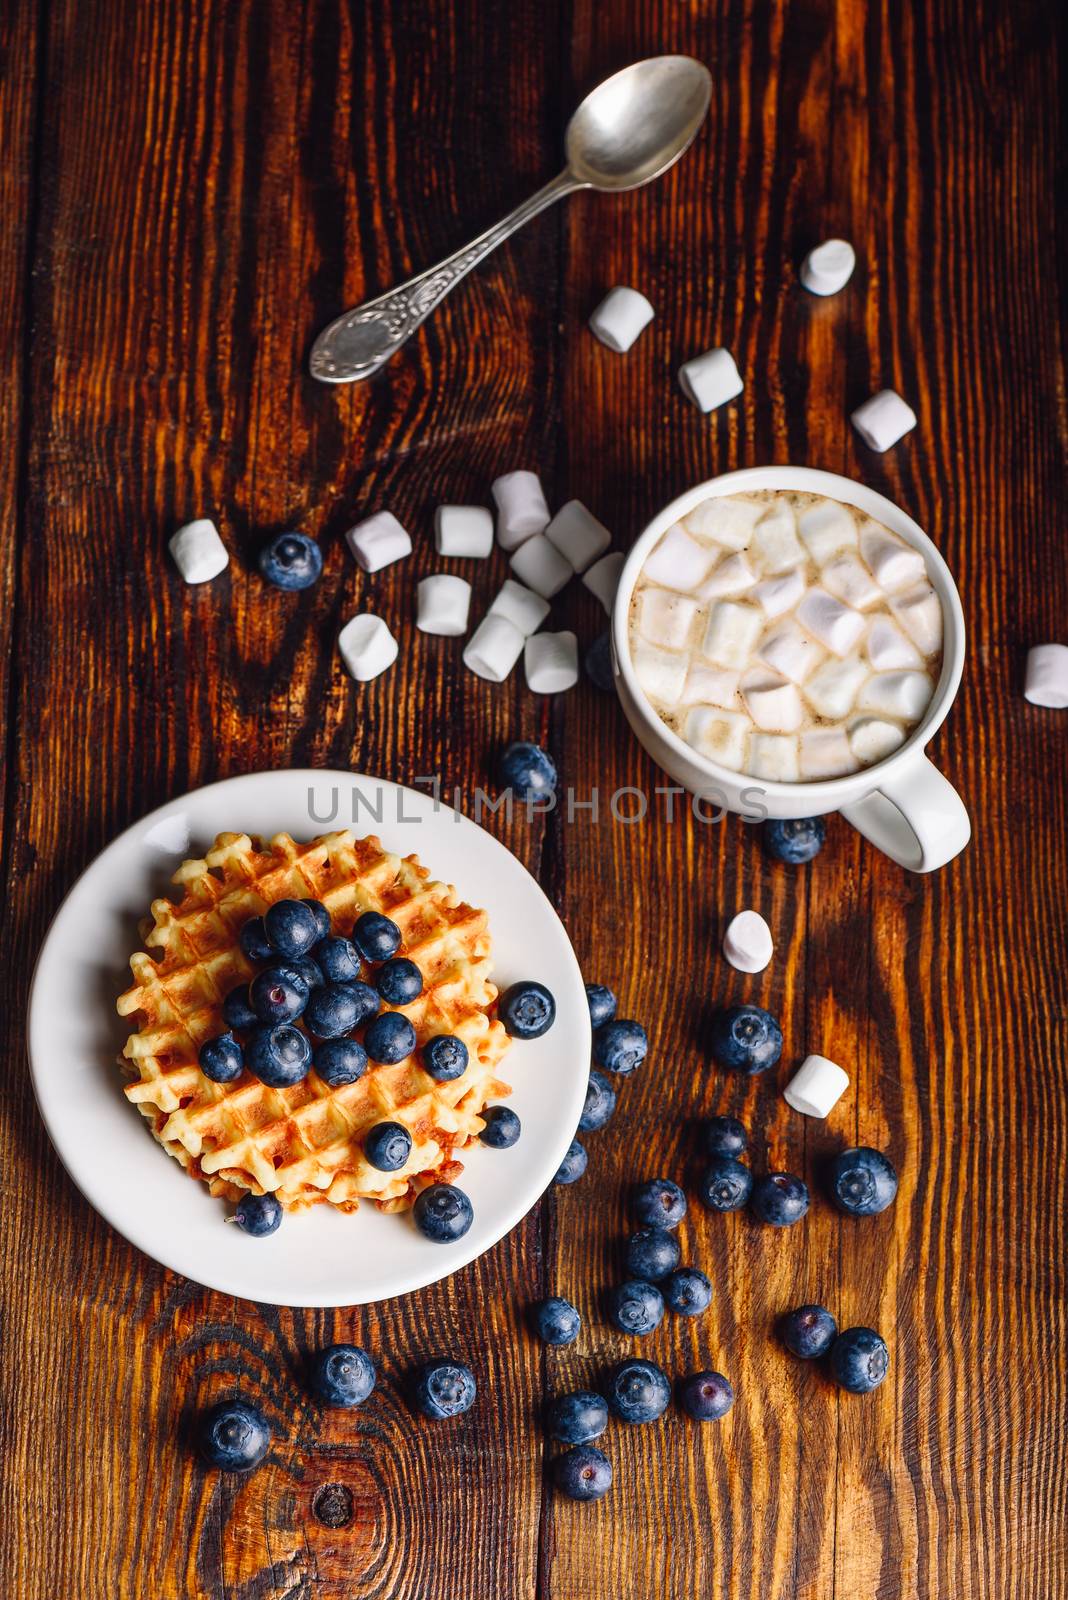 Waffles with Blueberry and Cup of Hot Chocolate. by Seva_blsv